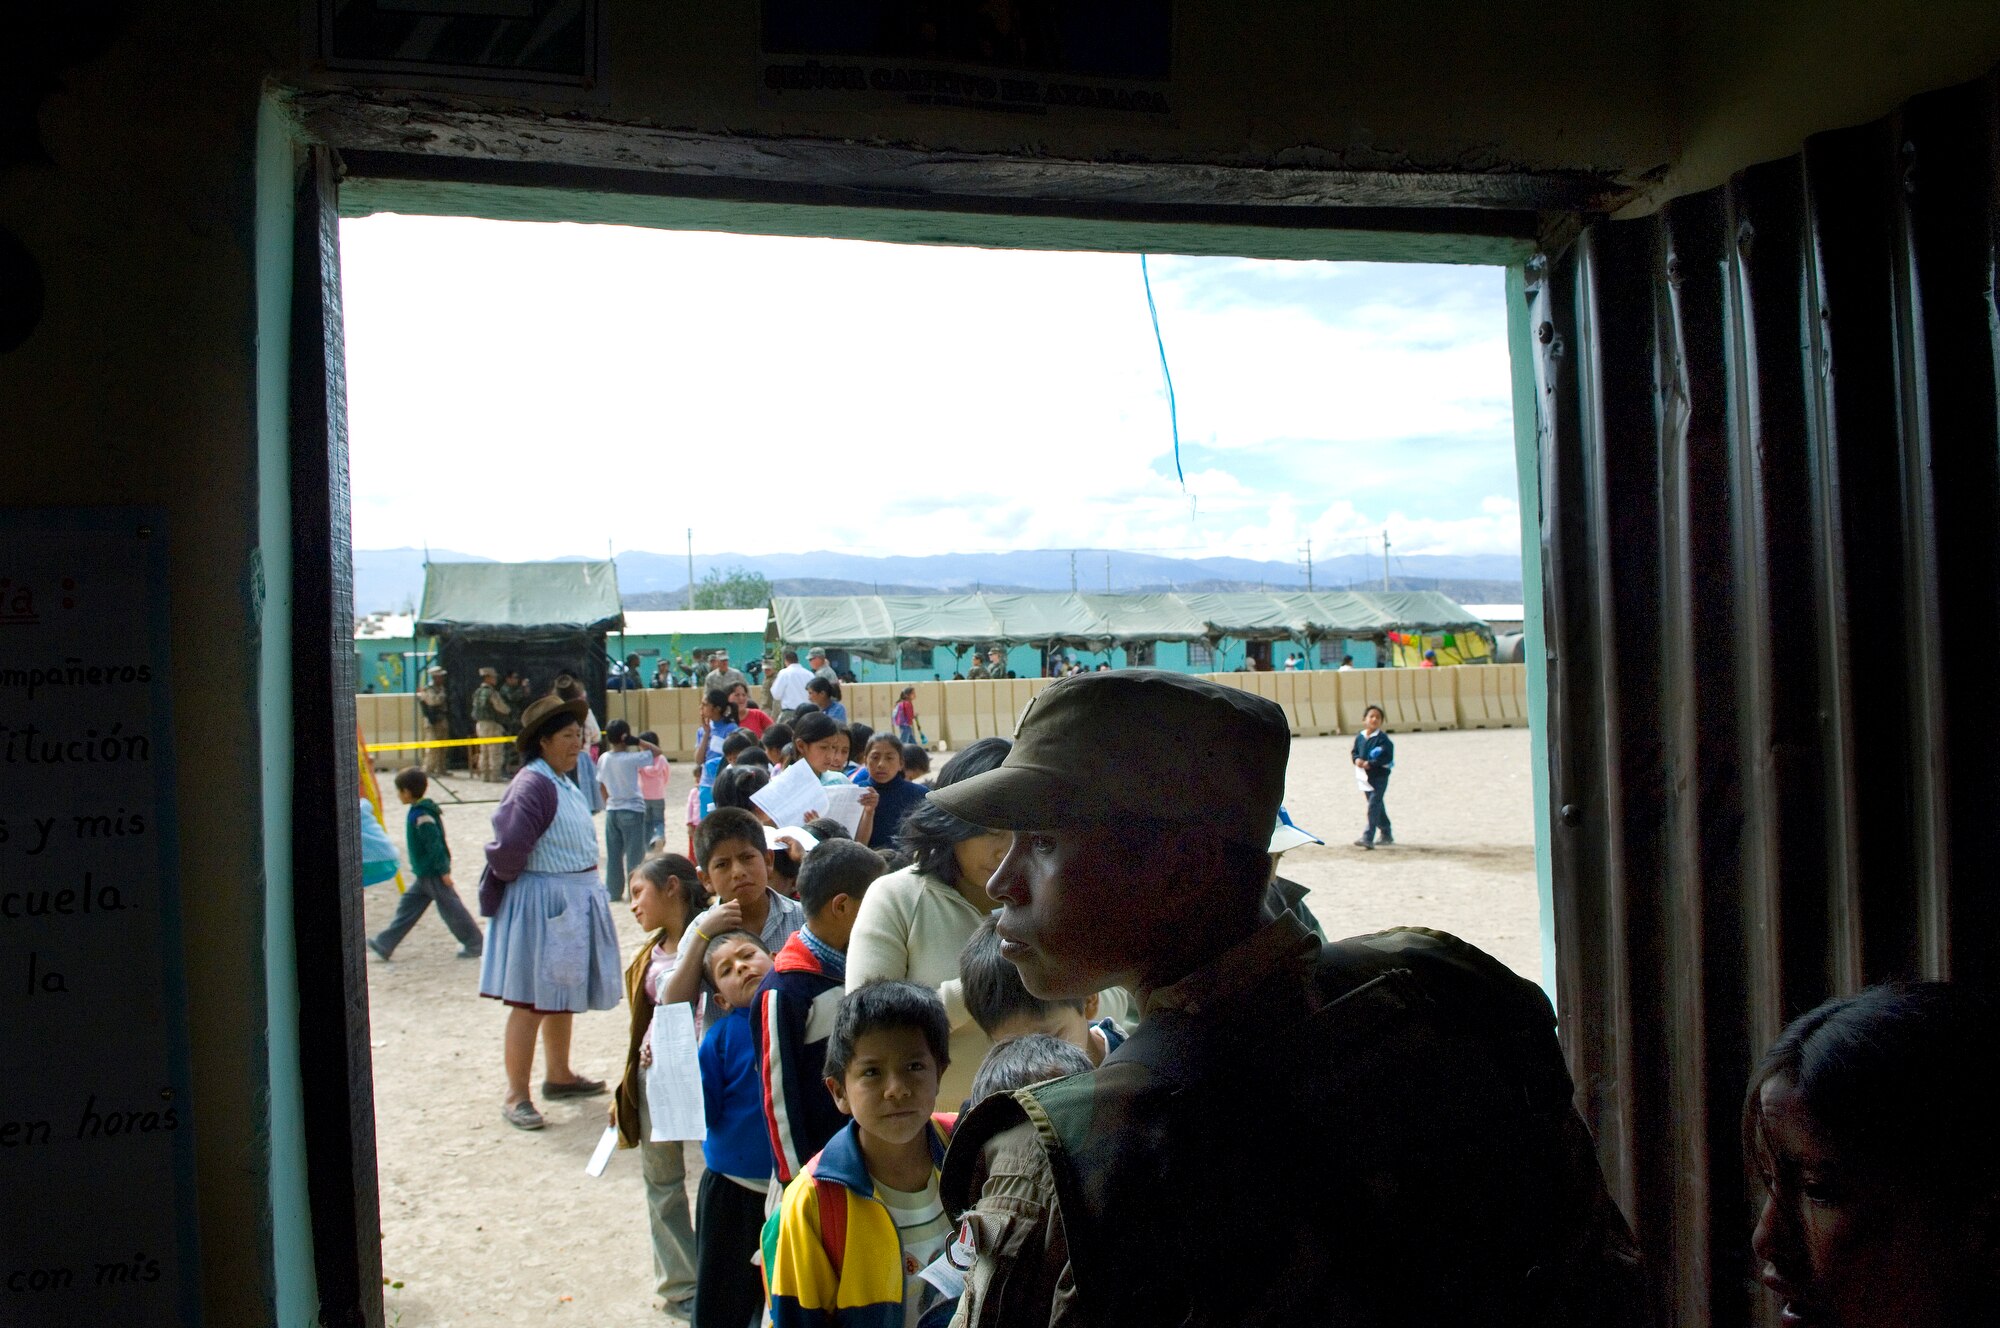 A Peruvian soldier guards a make-shift pharmacy June 22 during free medical evaluations for Peruvians living in the poorest regions of Ayacucho, Peru. American servicemembers are providing medical care during New Horizons-Peru 2008, a U.S. and Peruvian partnered humanitarian mission set on providing relief to underprivileged Peruvians. (U.S. Air Force photo/Staff Sgt. Bennie J. Davis III)